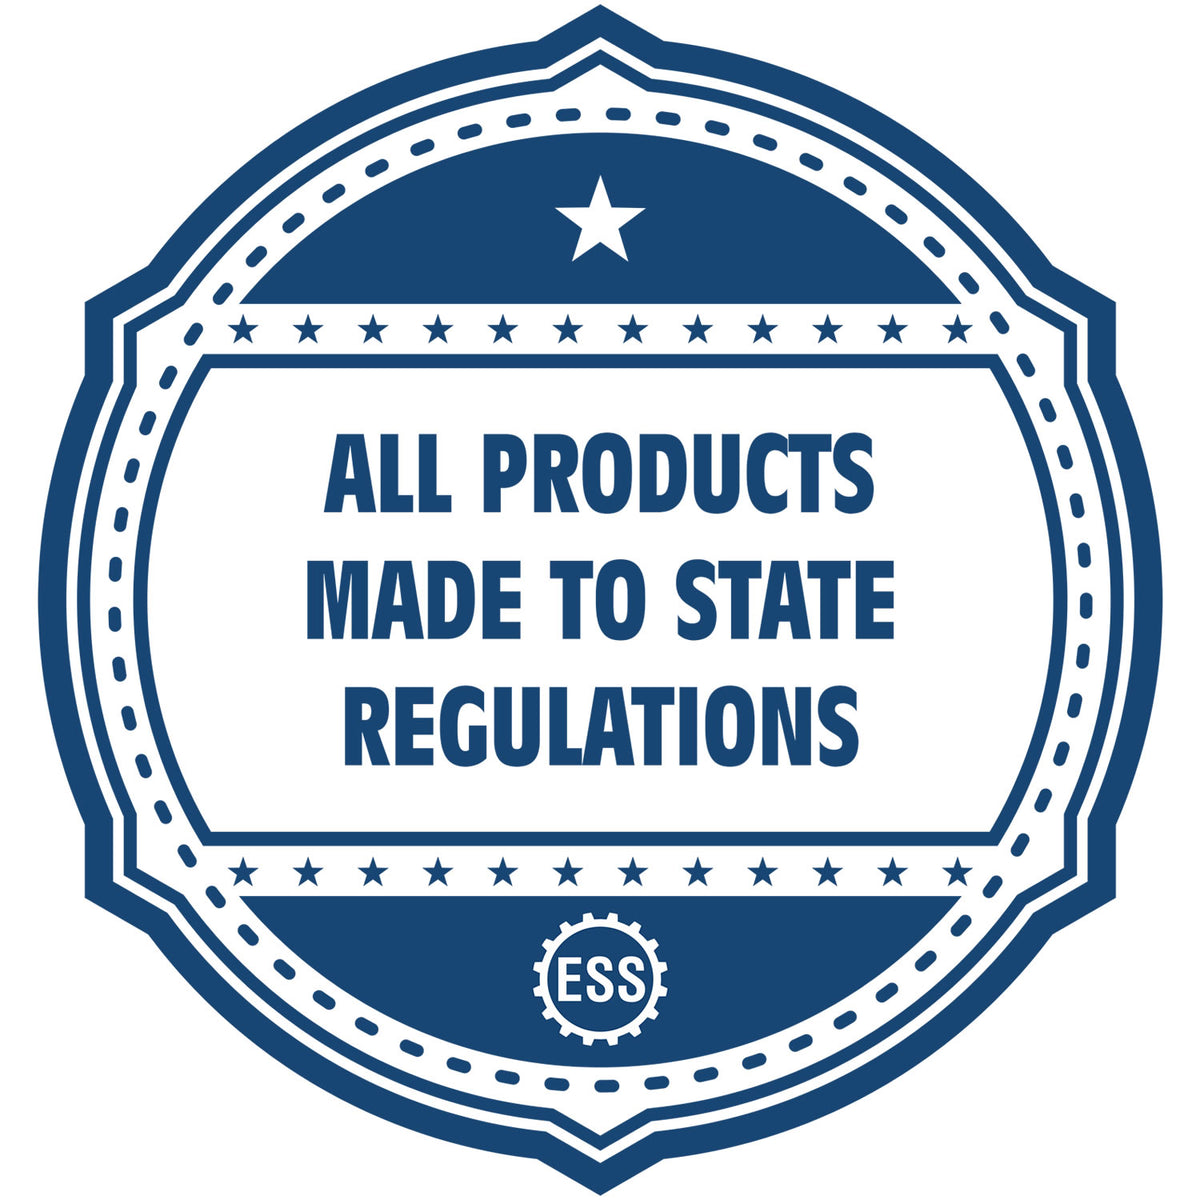 An icon or badge element for the Ohio Professional Engineer Seal Stamp showing that this product is made in compliance with state regulations.